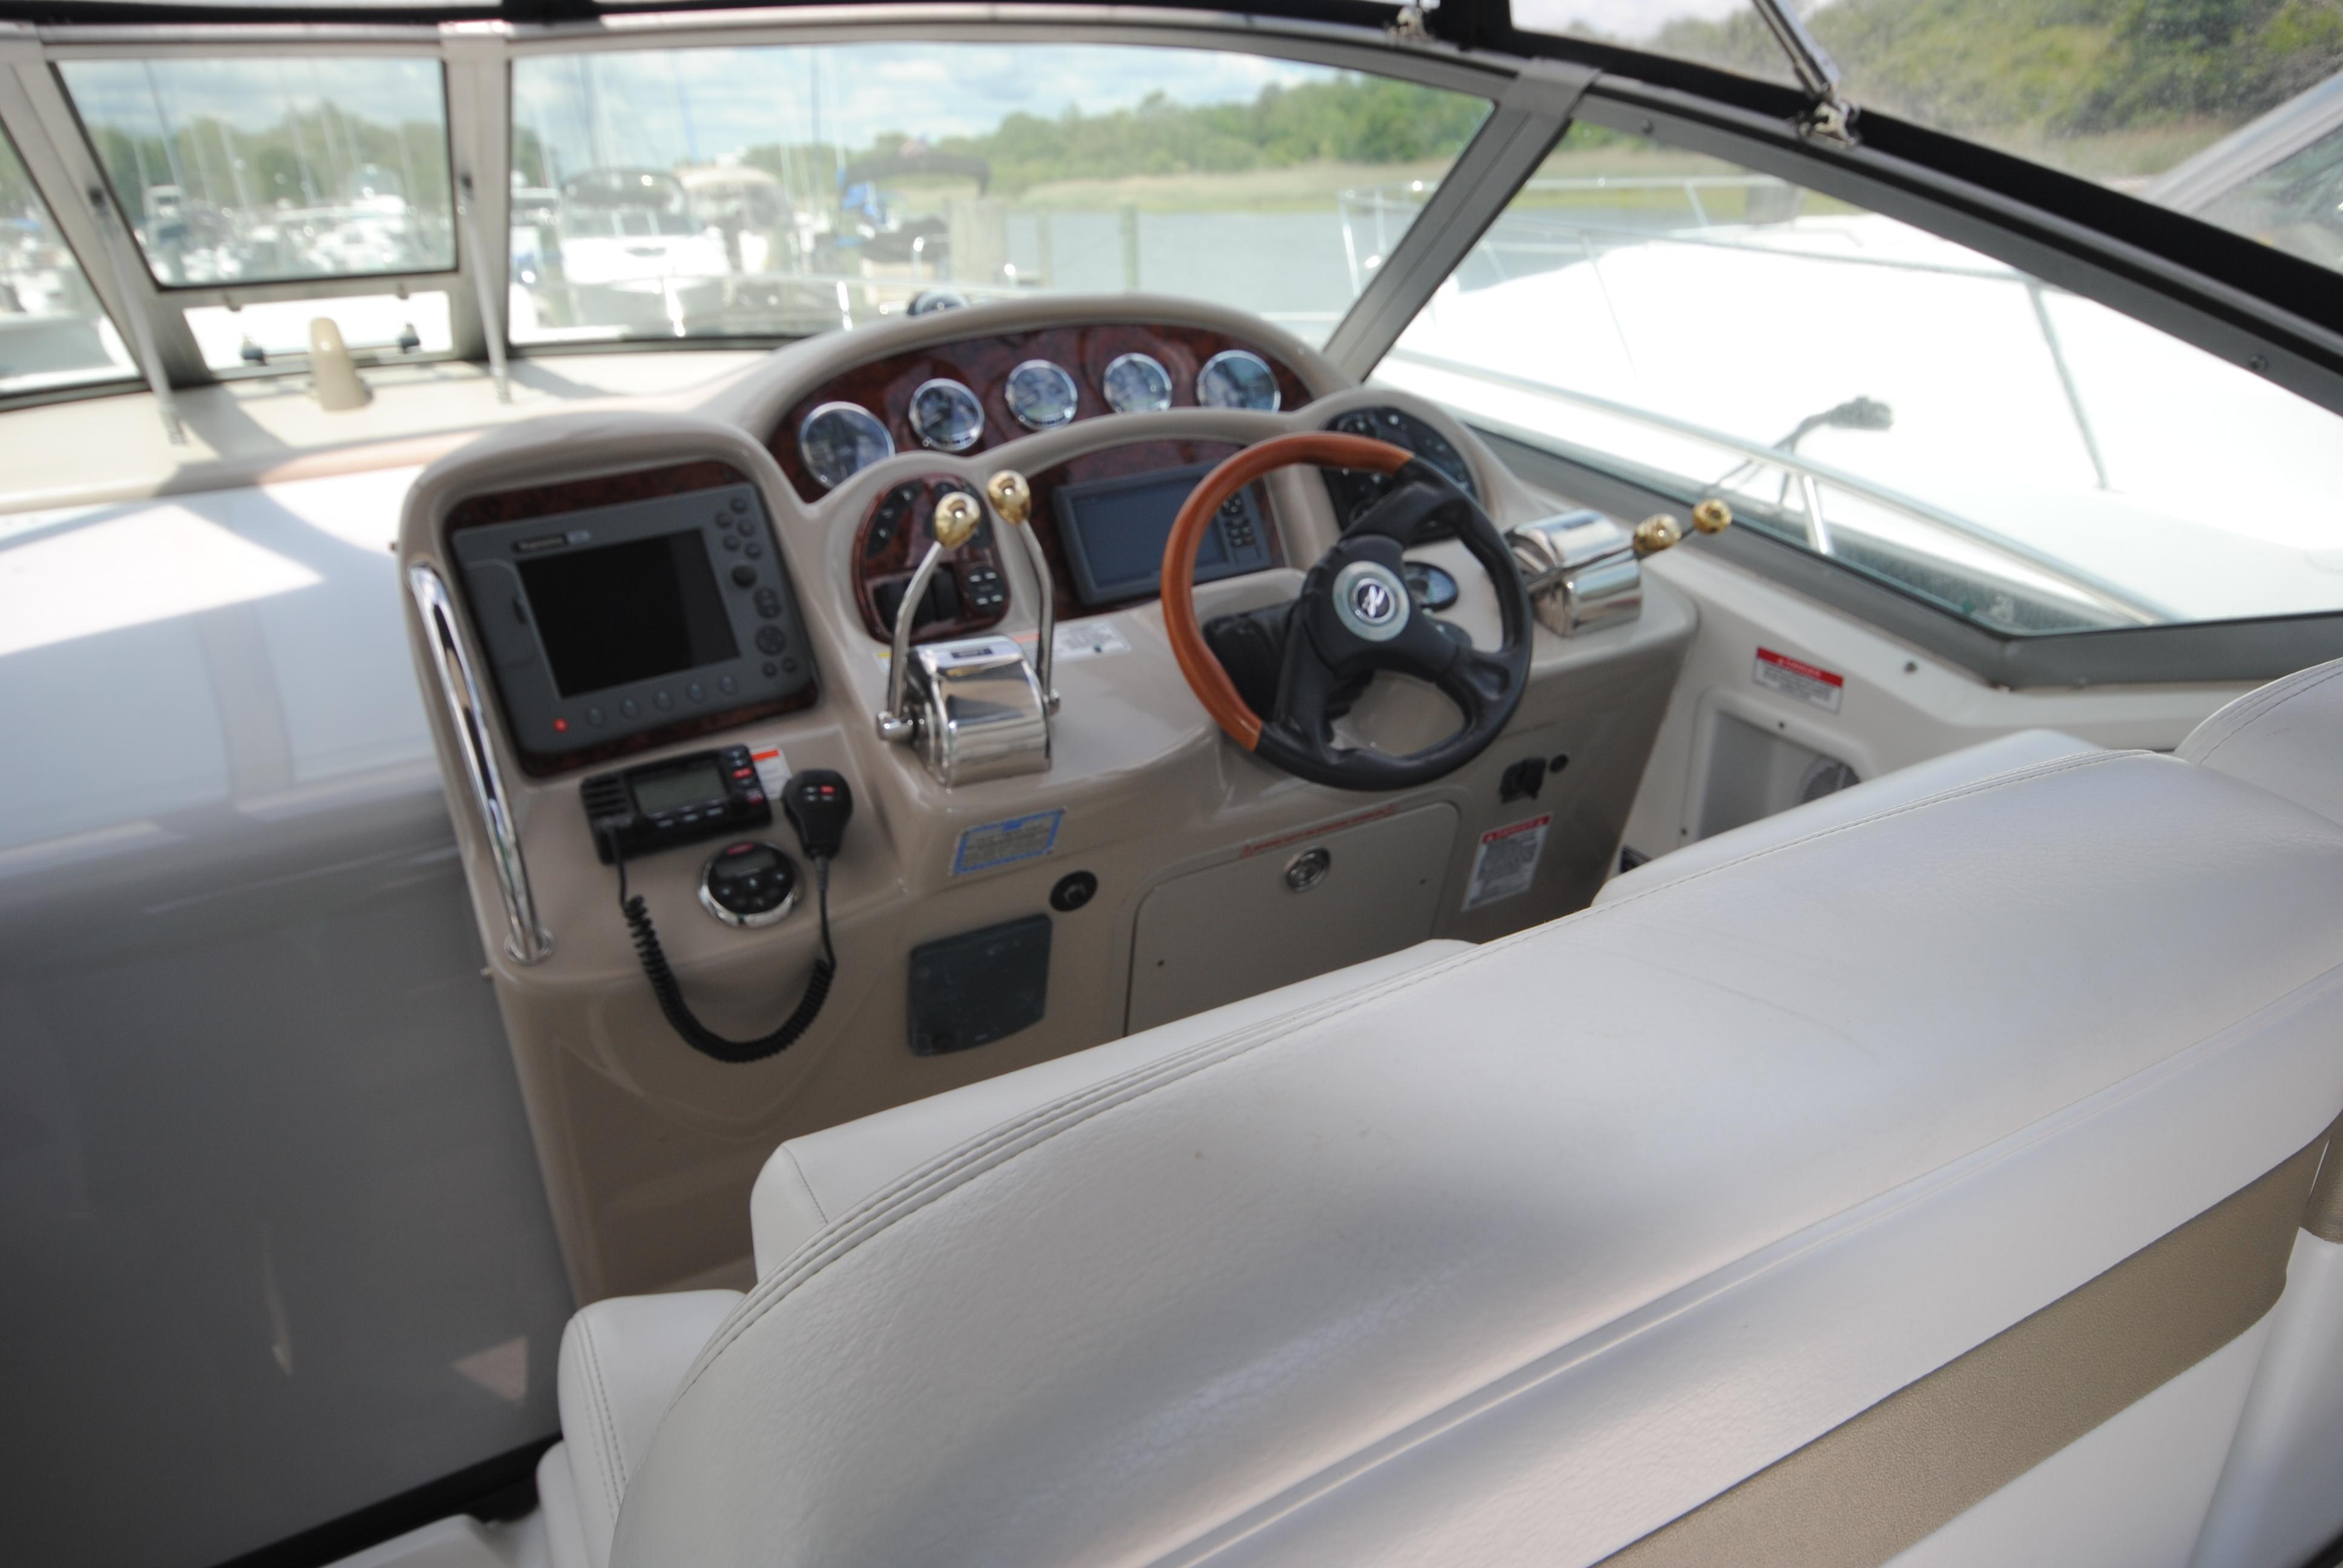 Captains Seat and Helm